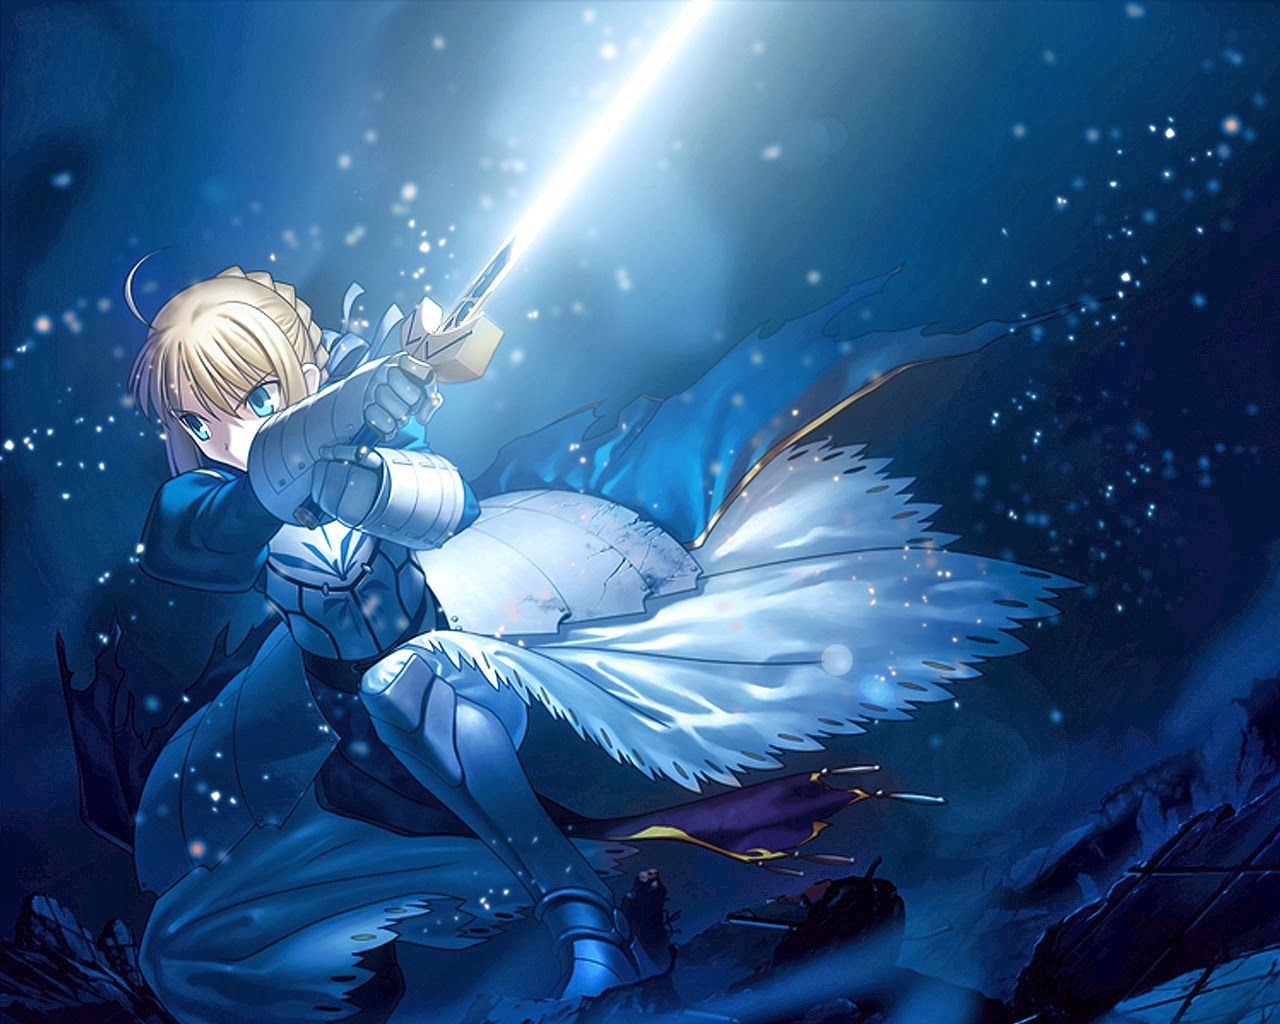 WOW: Fate Stay Night Saber, HD Fate Stay Night Saber Anime Wallpaper